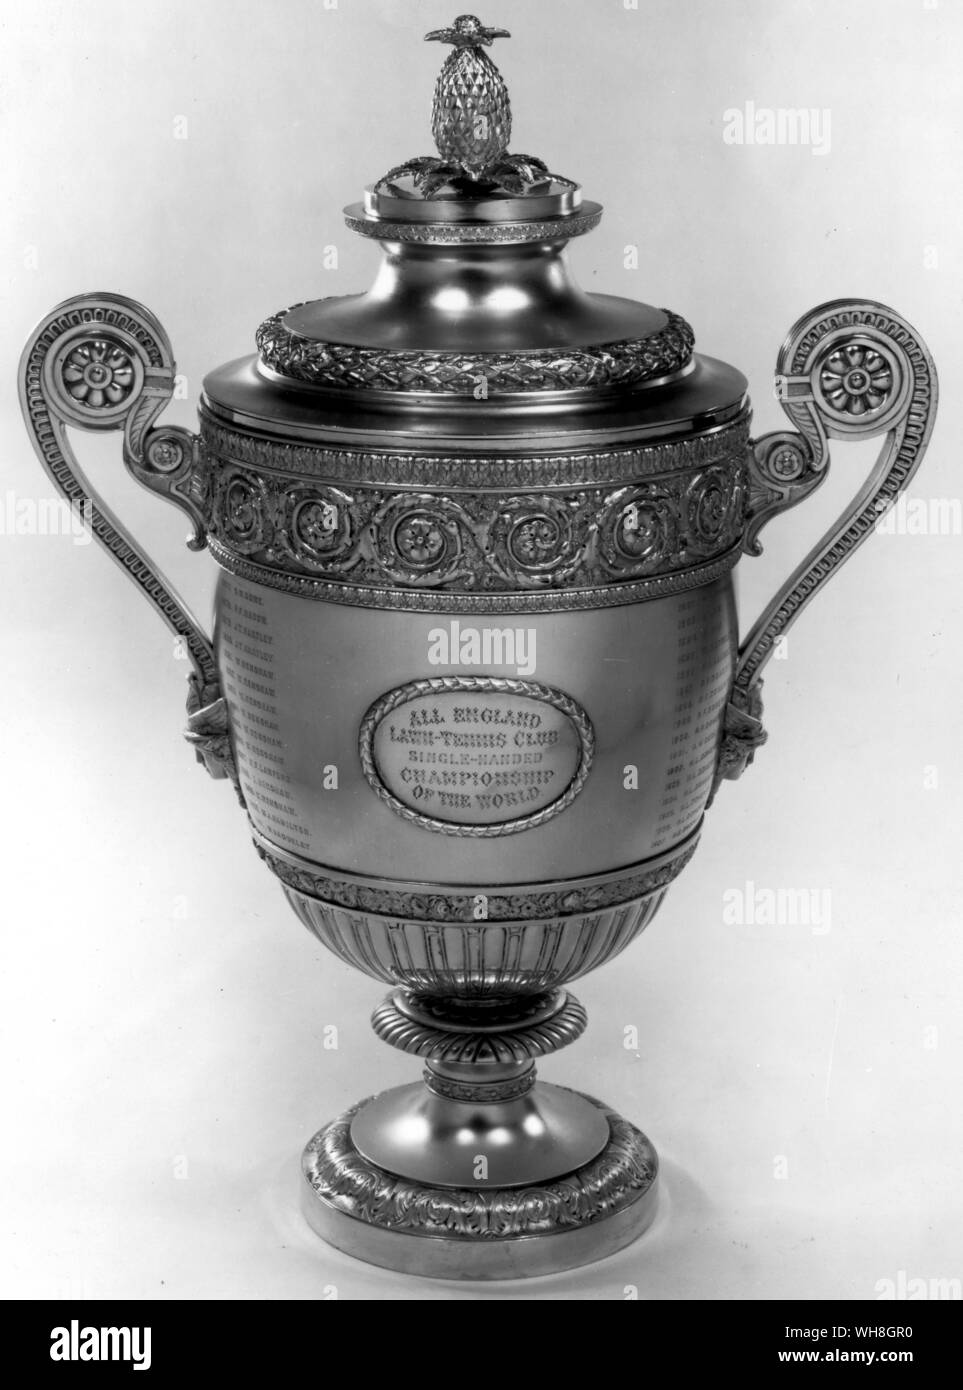 The Championship trophy for men's singles. The Encyclopedia of Tennis page 350. Stock Photo